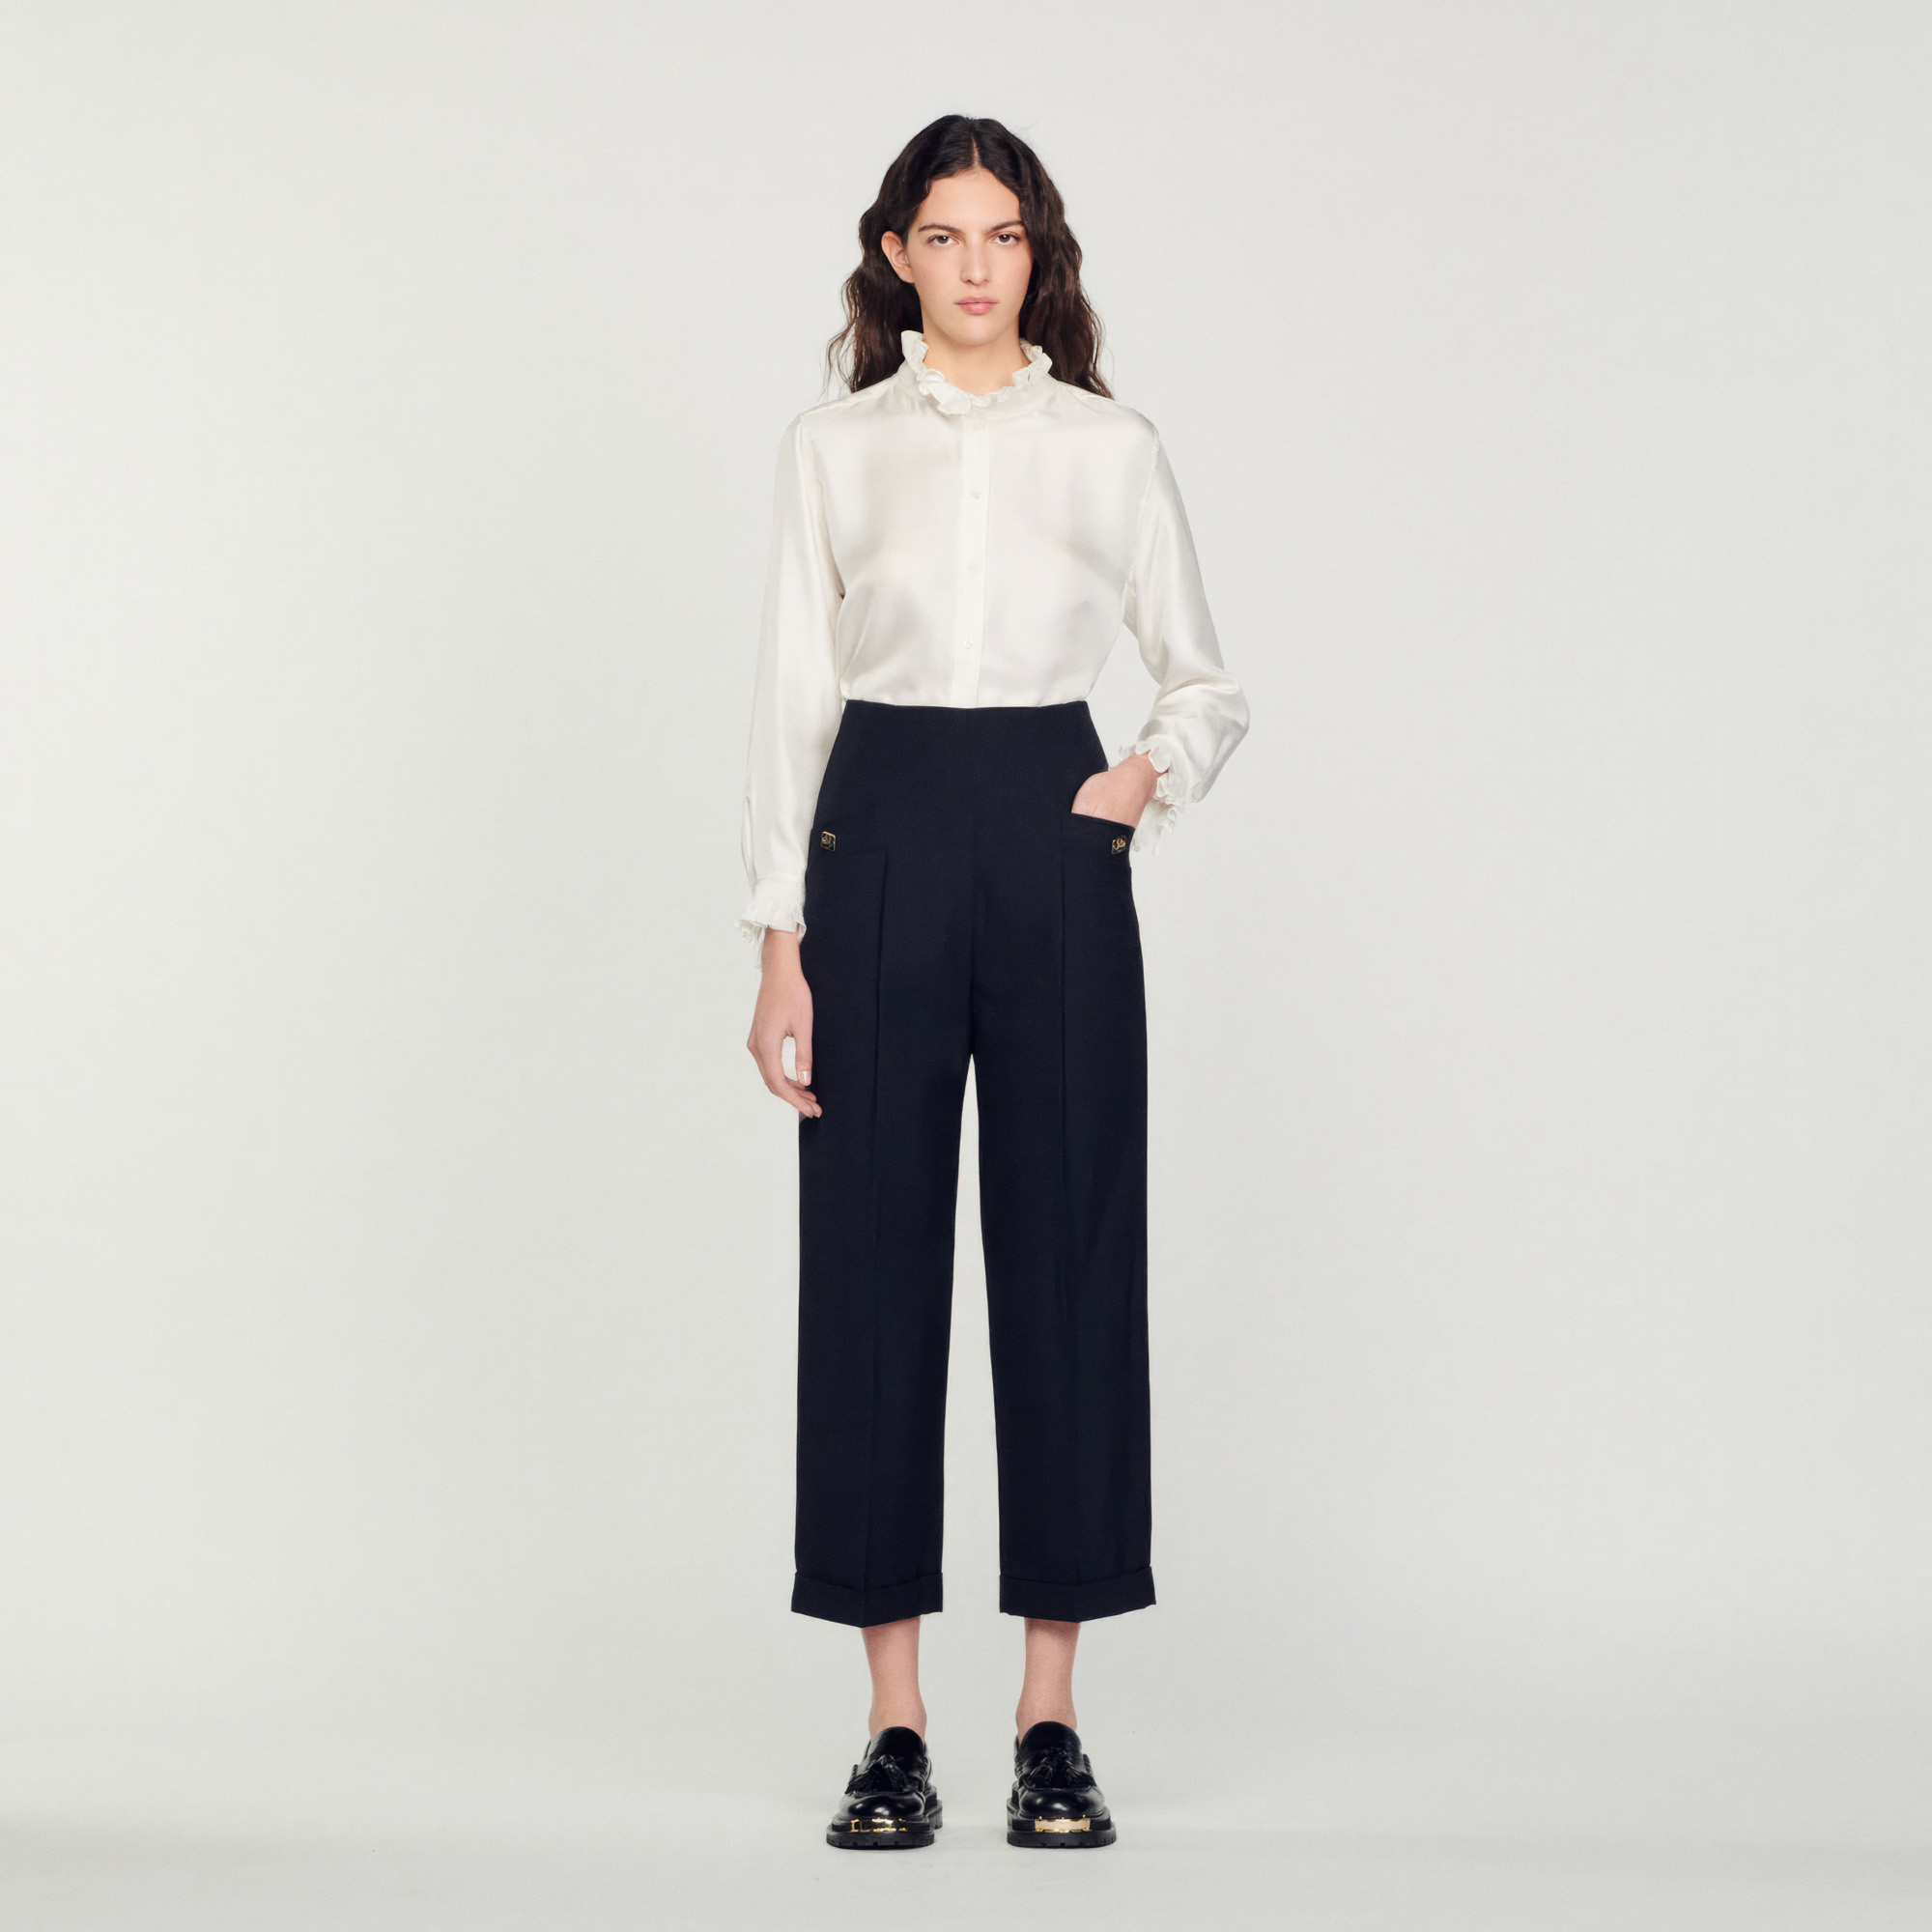 Sandro polyester Sandro women's pants â€¢ Virgin wool pants â€¢ High waist â€¢ Side pockets with fancy double S buttons â€¢ Piped pockets at the back â€¢ Turn-ups at the hems â€¢ Concealed zip fastening at the center back â€¢ These pants match the jacket The model is 5'10 tall and wears a size 36 FR / 4 US